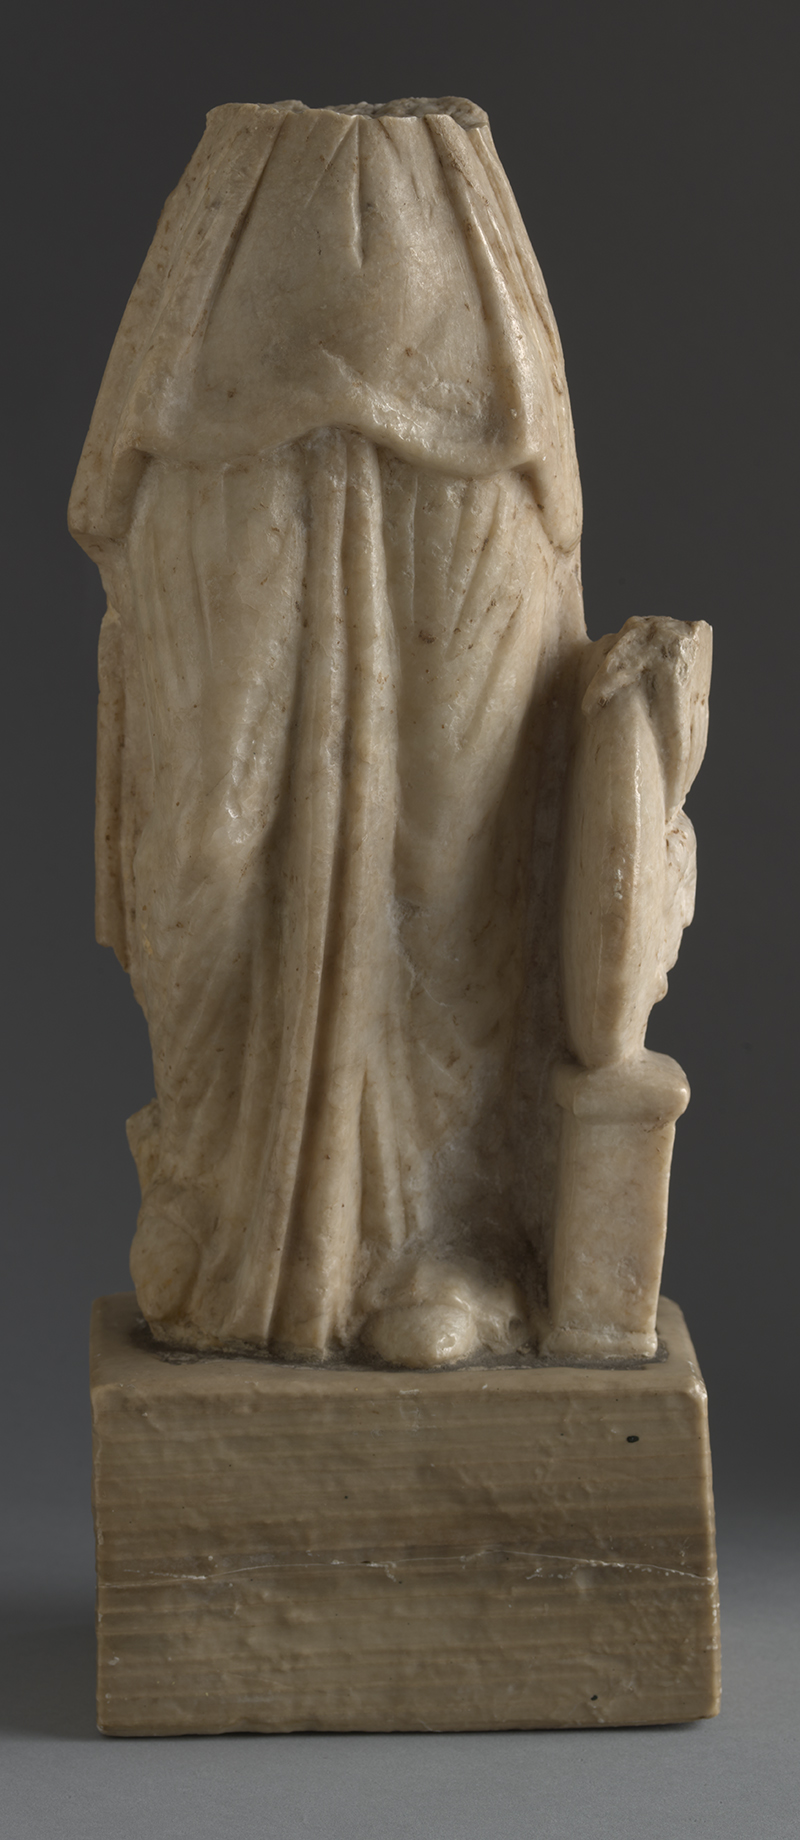 a partial statue of a draped figure made of stone